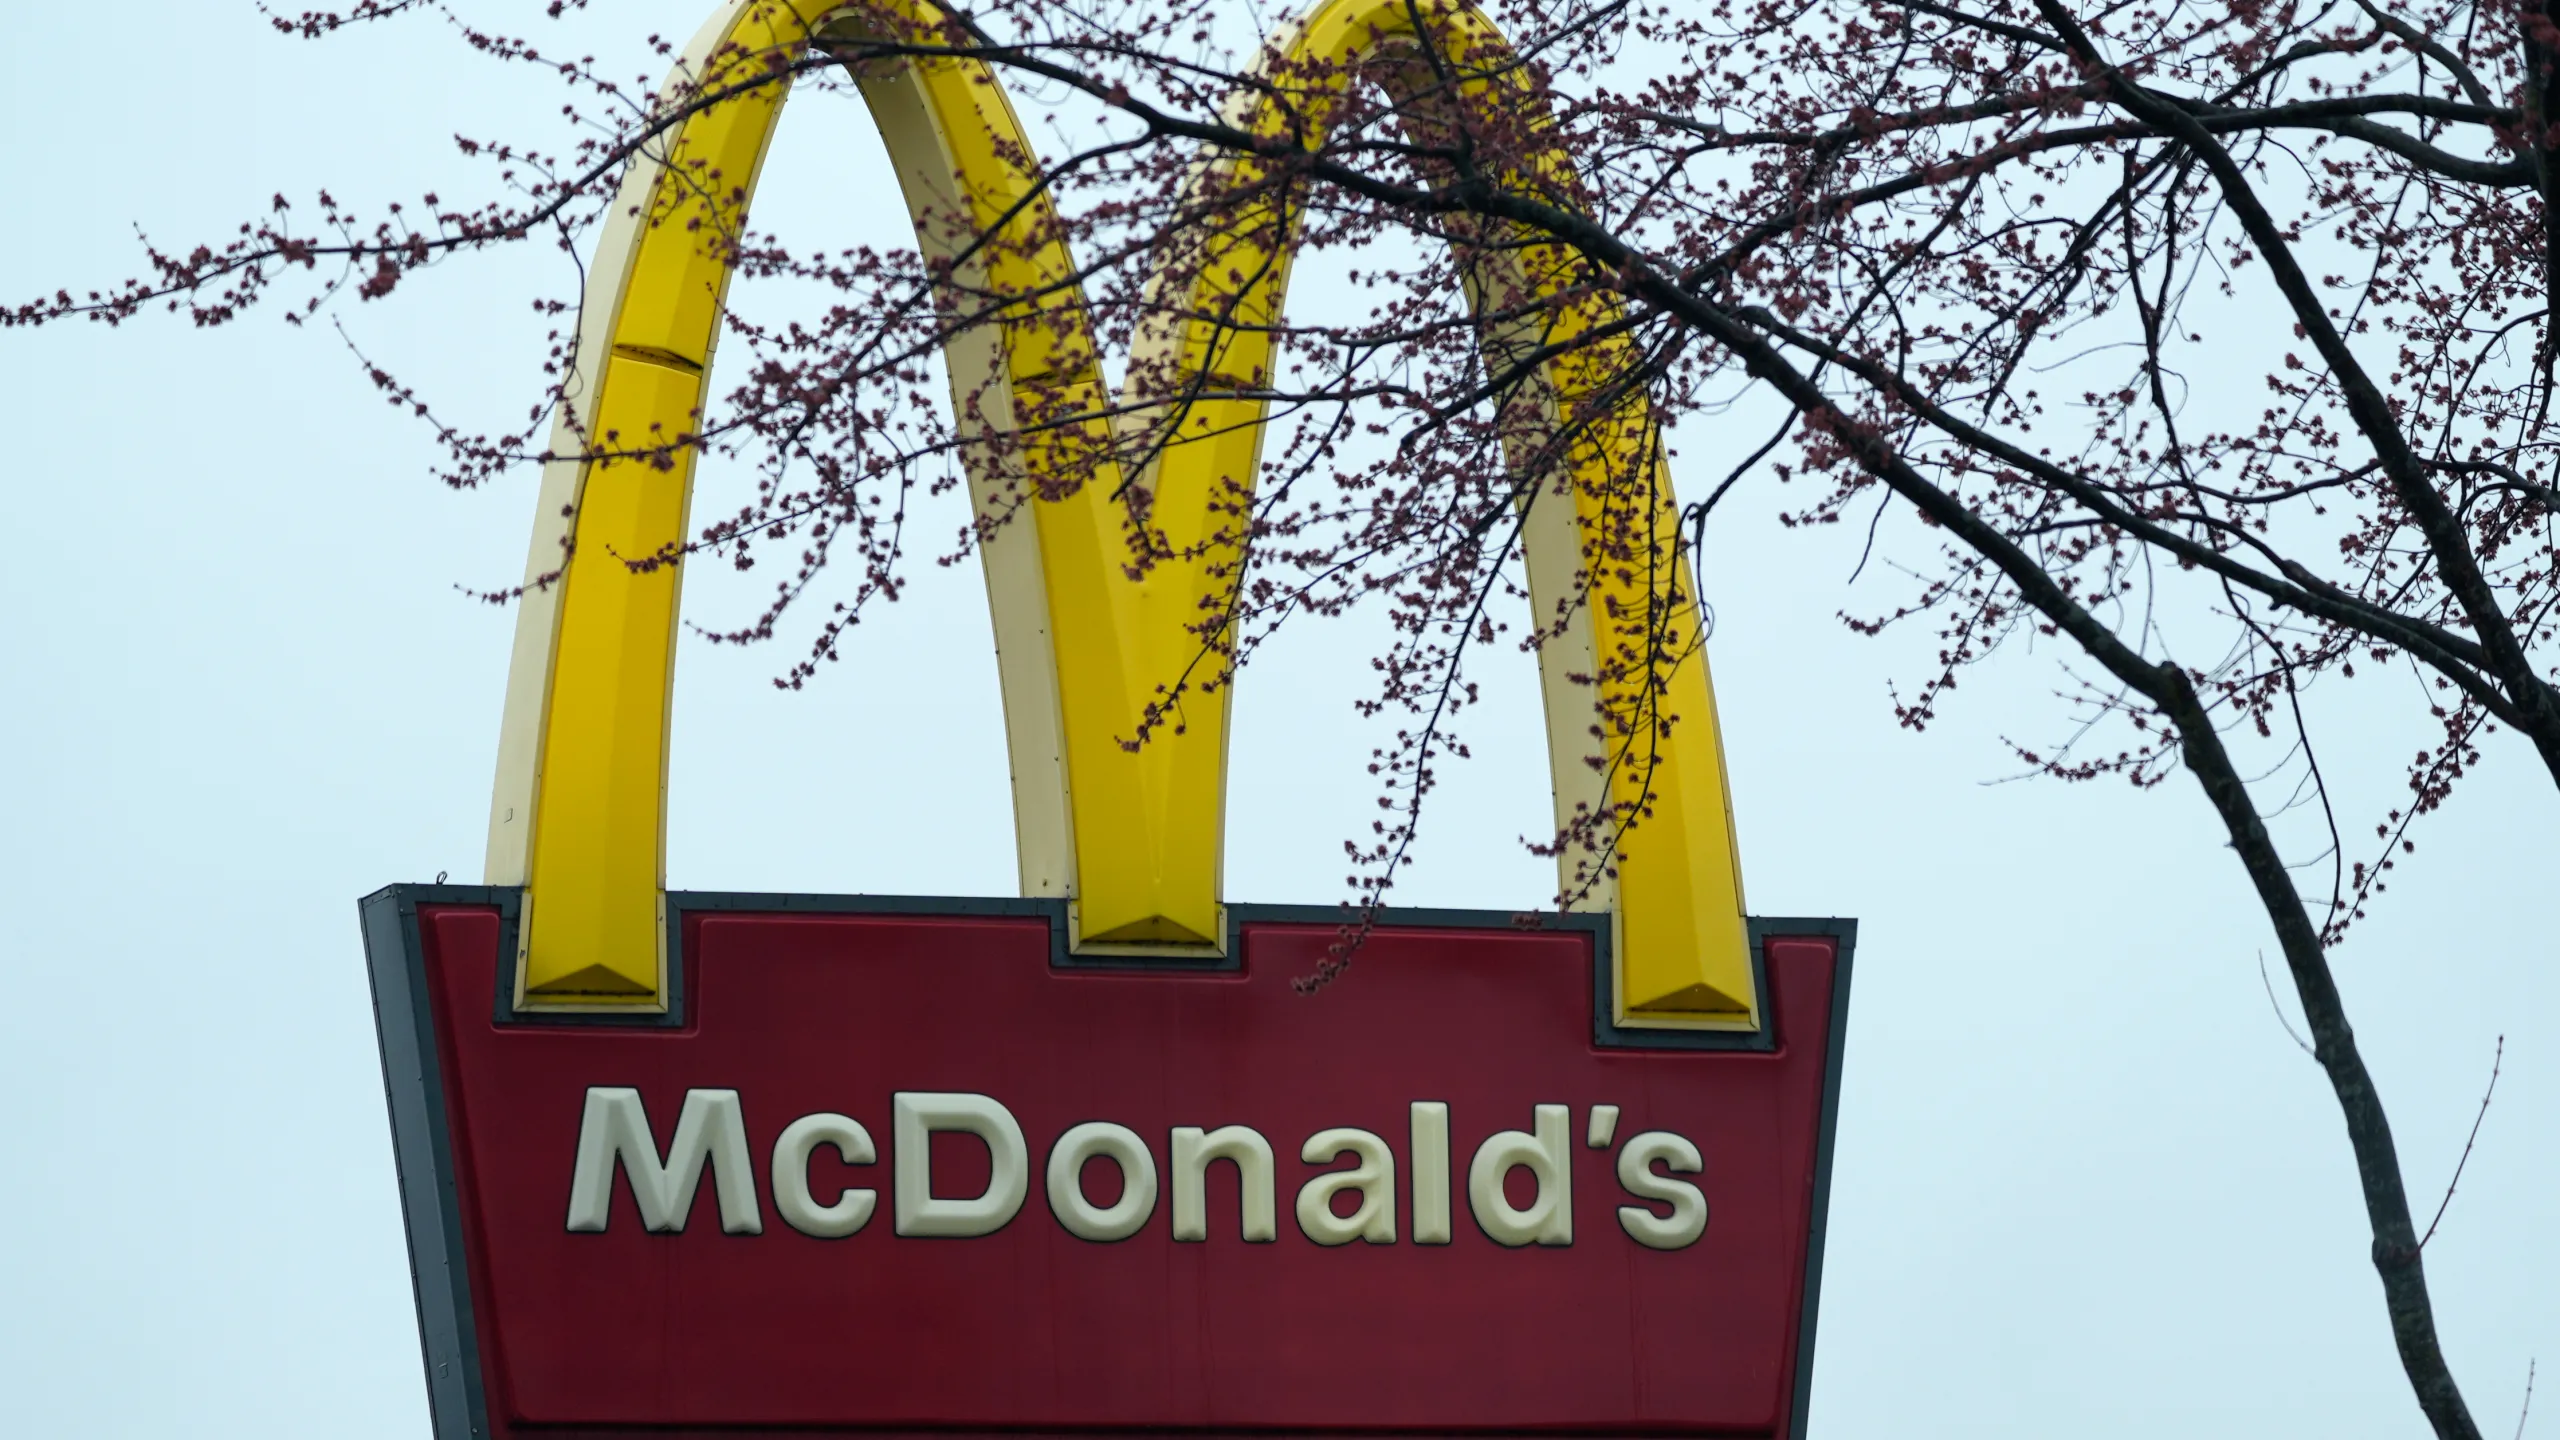 McDonald's President Addresses Pricing Concerns in Open Letter